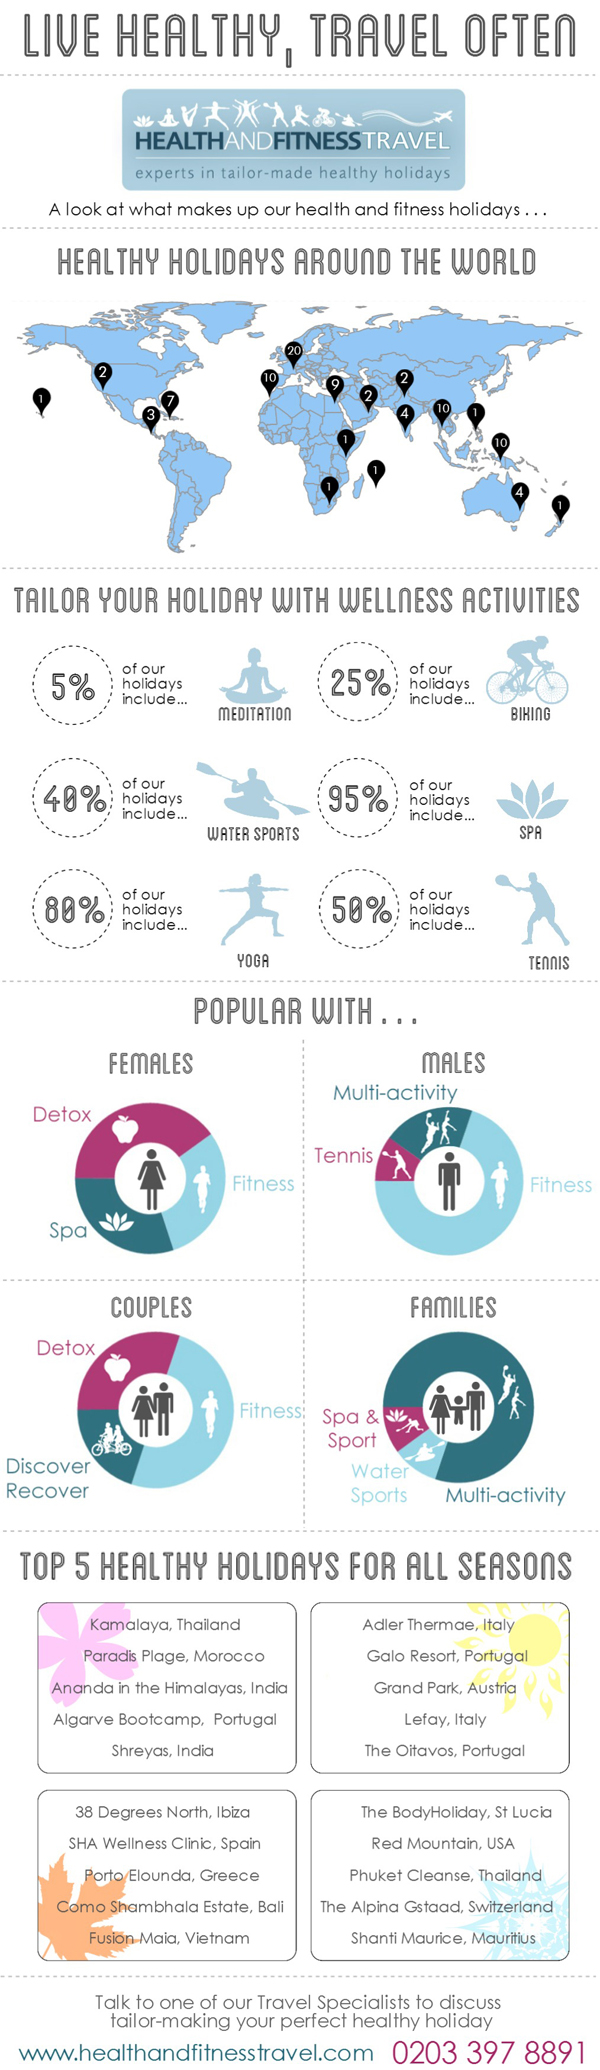 Live healthy travel often infographic